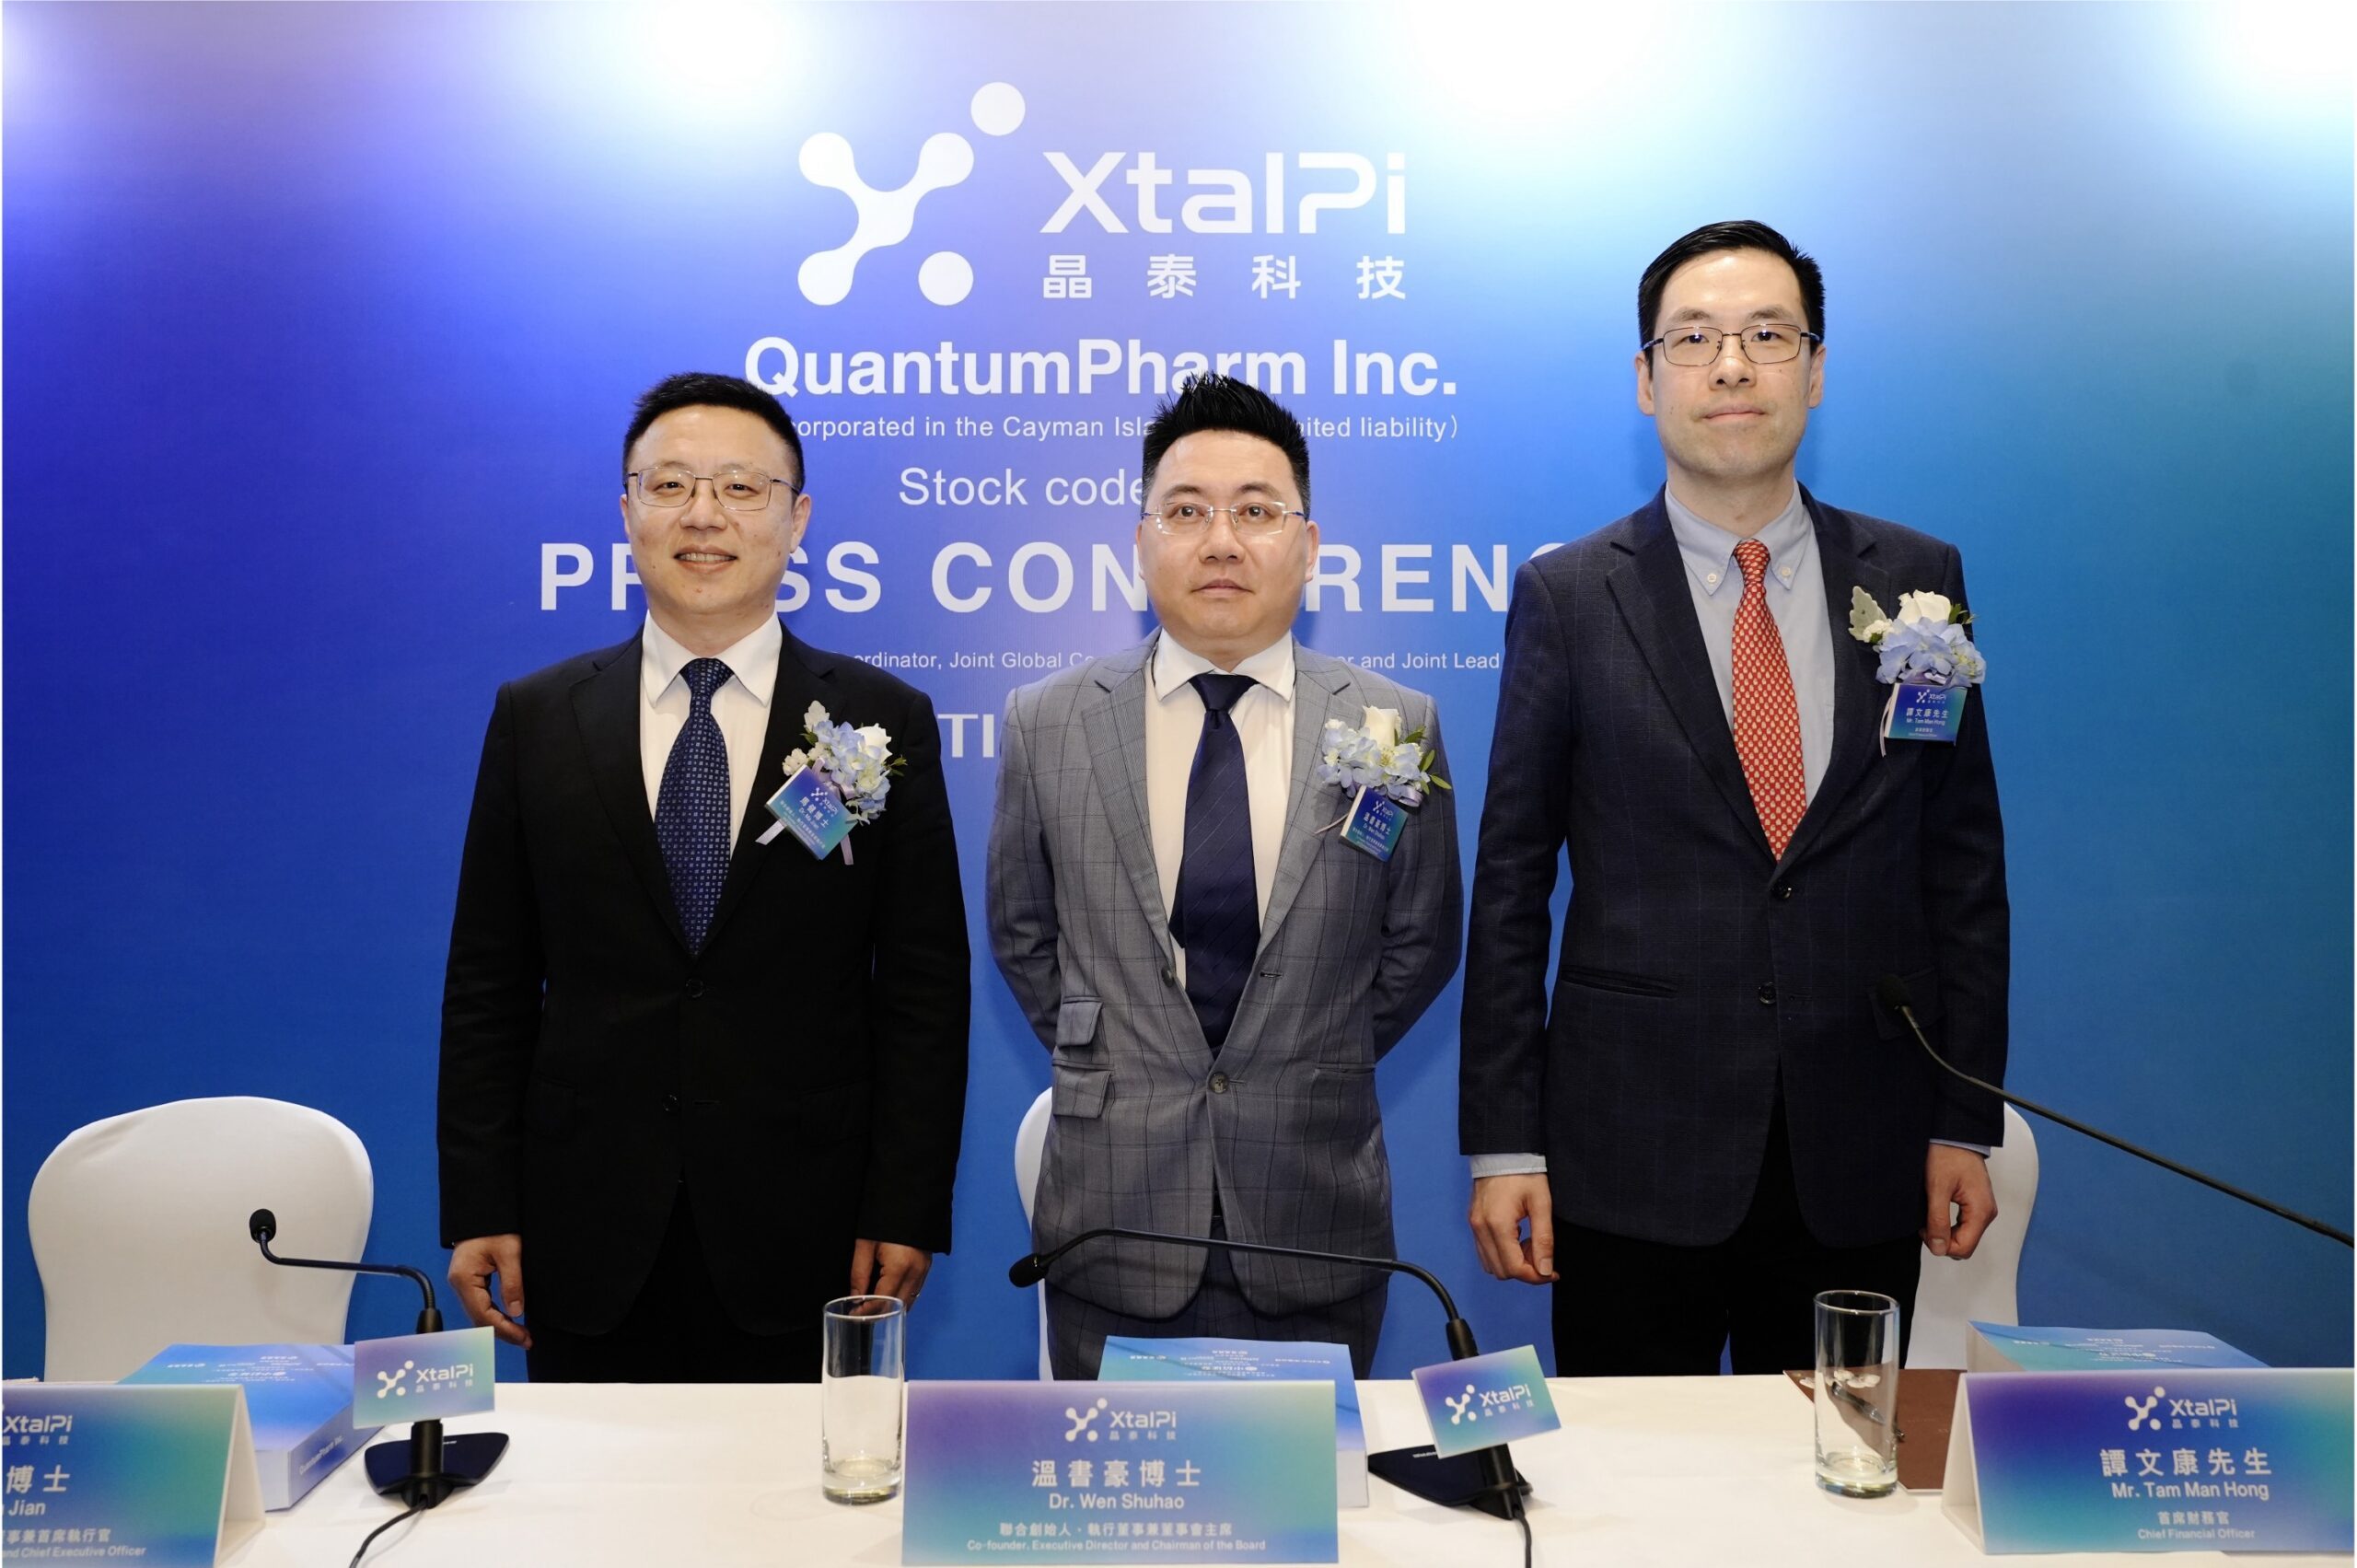 AI drug researcher QuantumPharm eyes $145m HK IPO to fuel global expansion